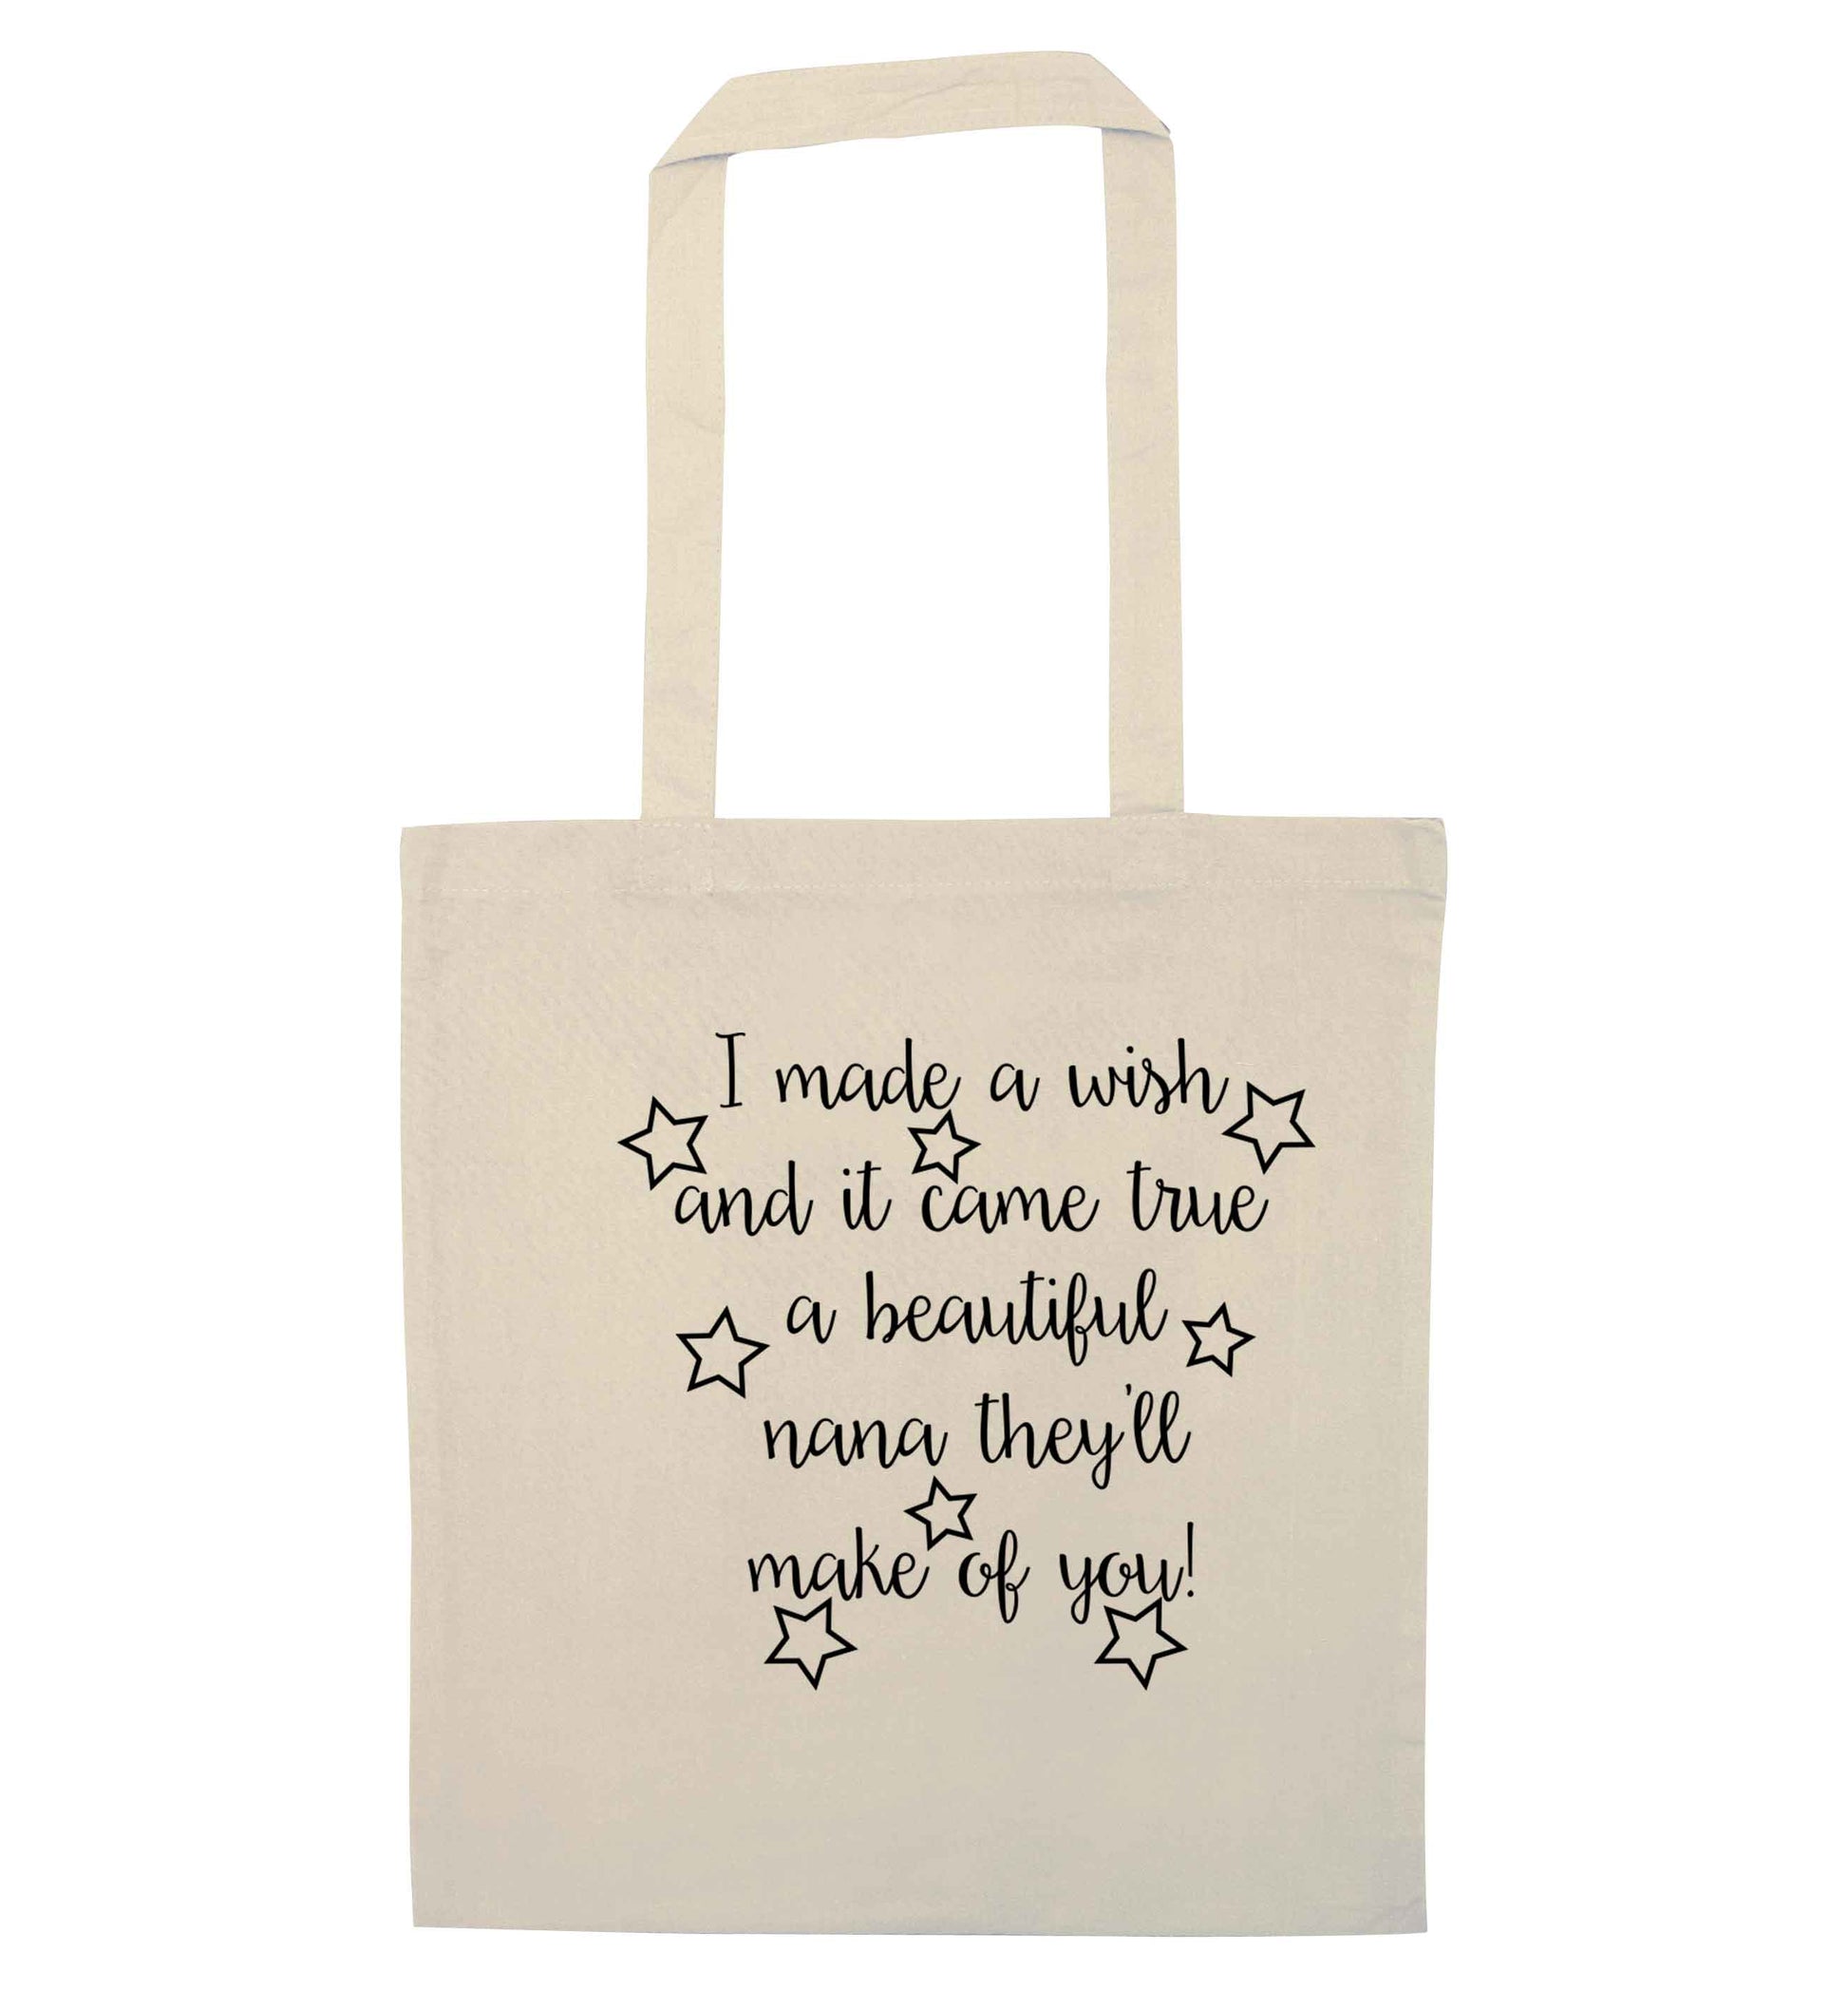 I made a wish and it came true a beautiful nana they'll make of you! natural tote bag